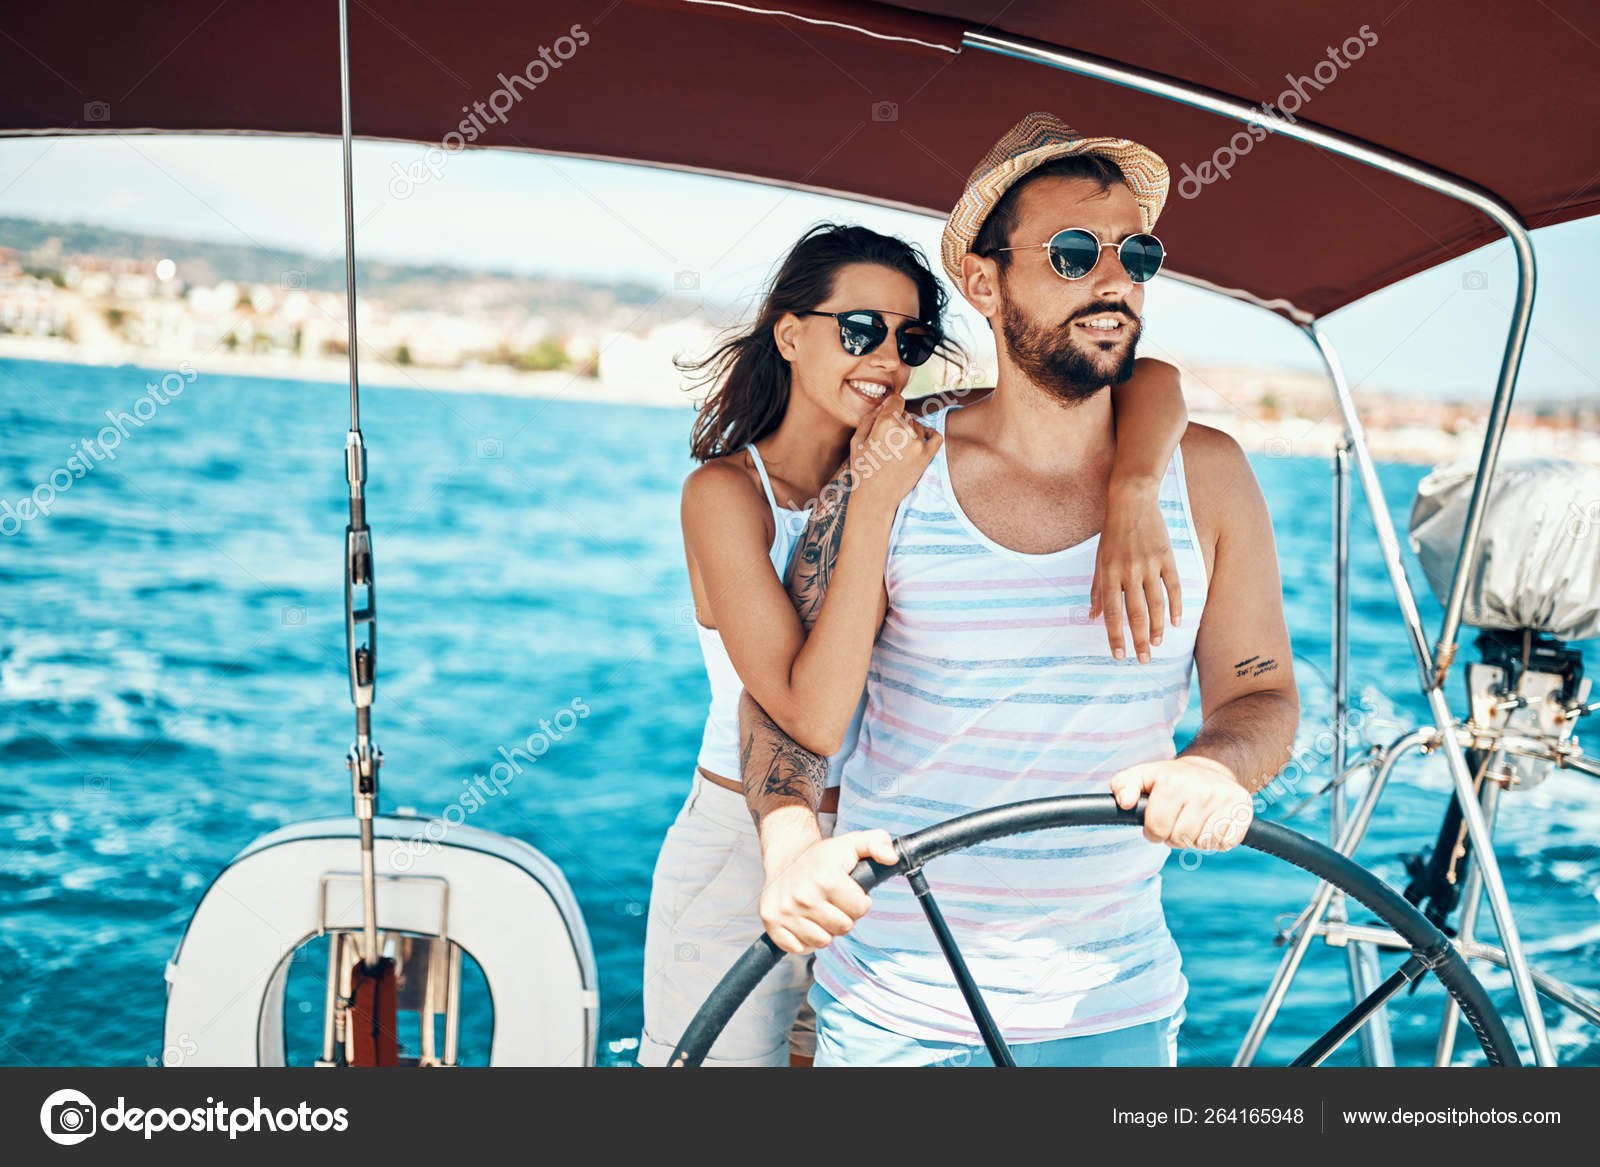 Romantic couple on a yacht enjoy bright sunny day on vacation